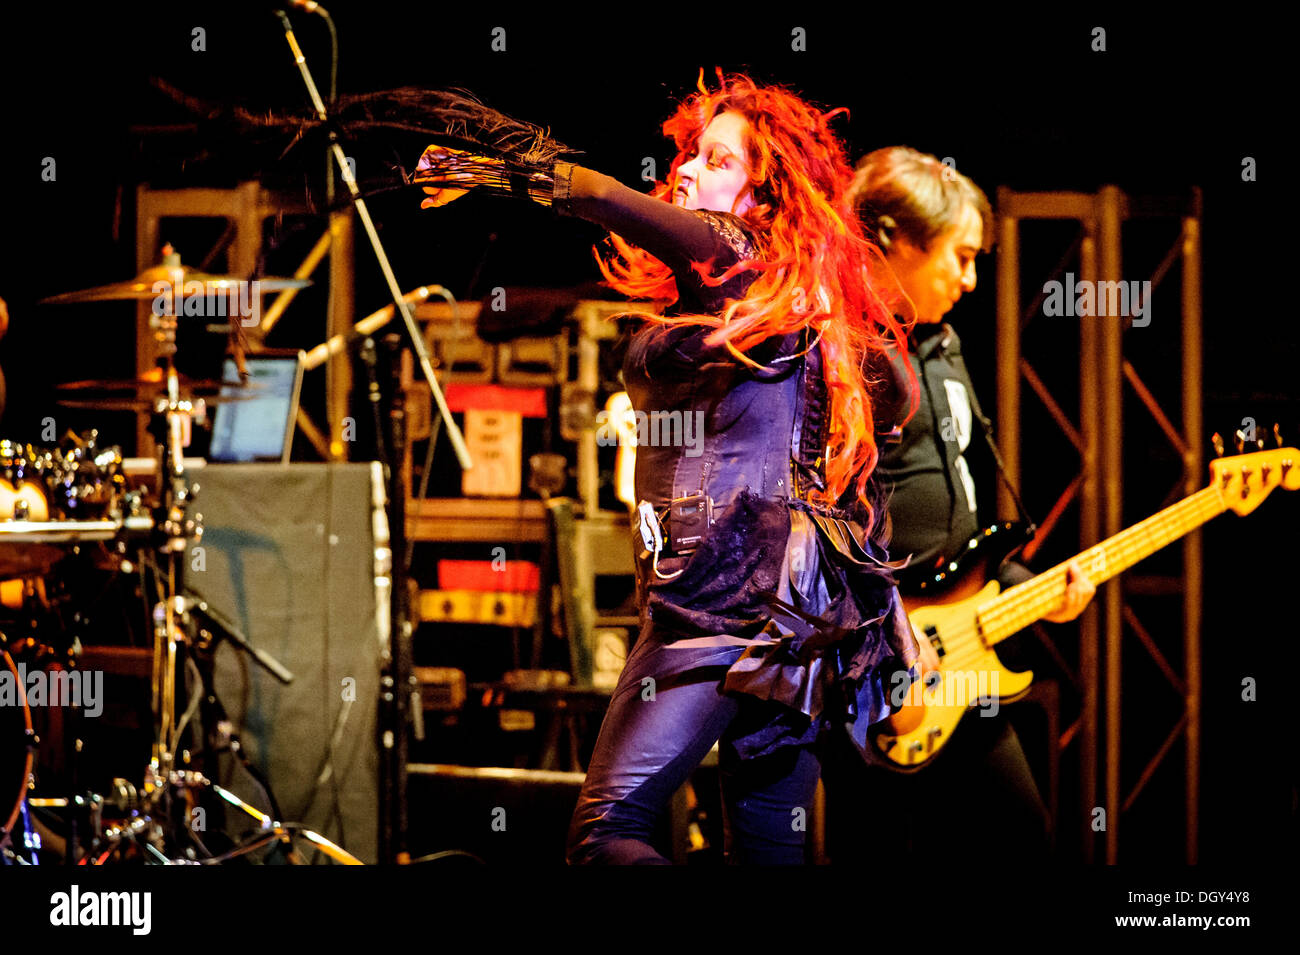 Toronto, Ontario, Canada. 27th Oct, 2013. American singer CYNDI LAUPER performed sold out show at historical Massey Hall in Toronto. © Igor Vidyashev/ZUMAPRESS.com/Alamy Live News Stock Photo